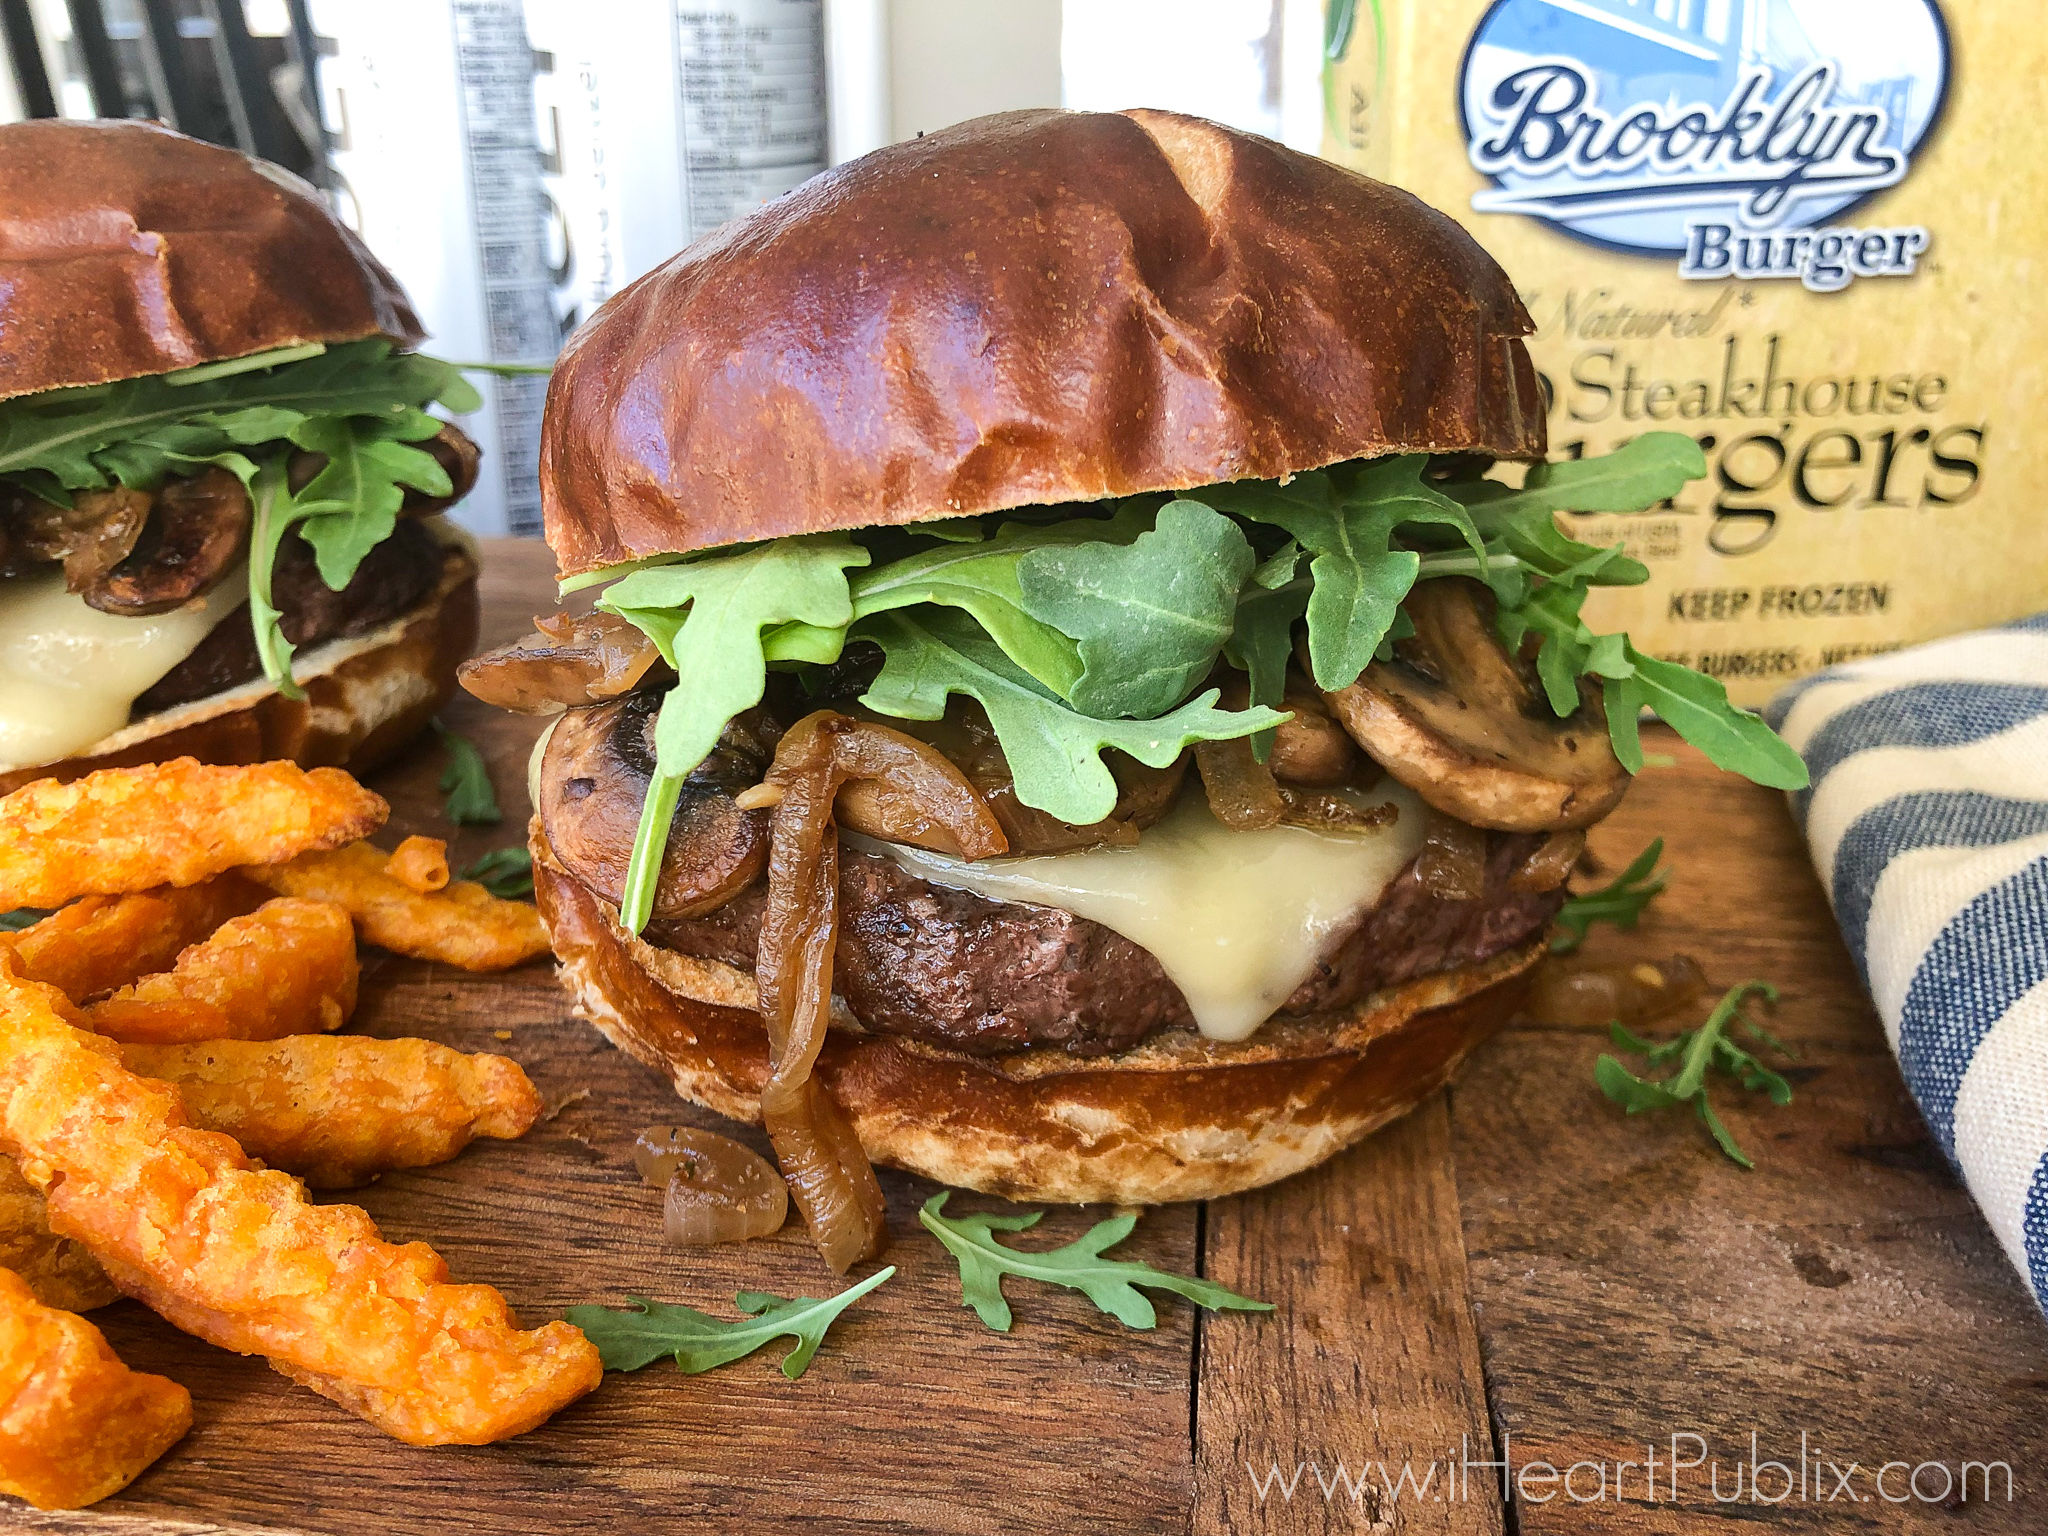 Can't-Miss Deals On Brooklyn Burger Steakhouse Burgers This Week At Publix - $9.99 For The 2-Pound Boxes Of Burgers! on I Heart Publix 1